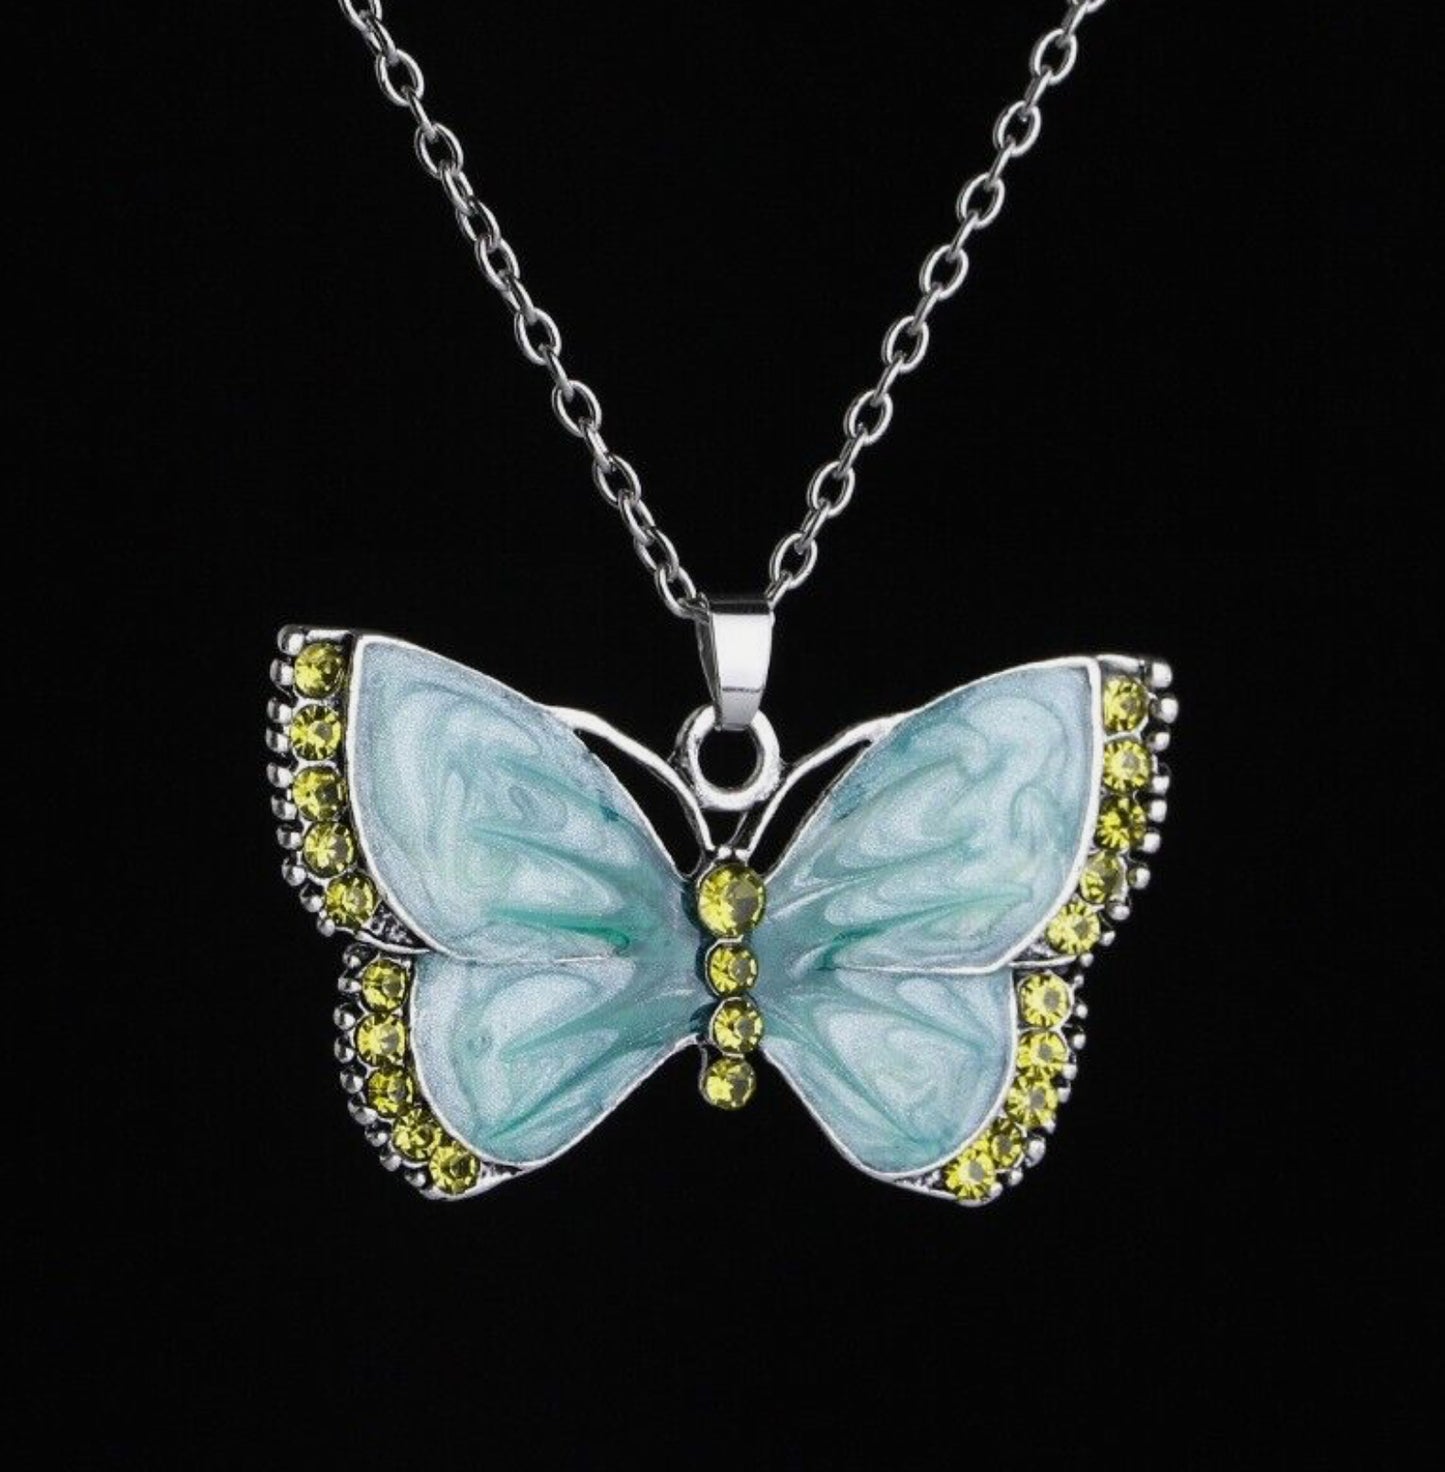 Green large butterfly necklace